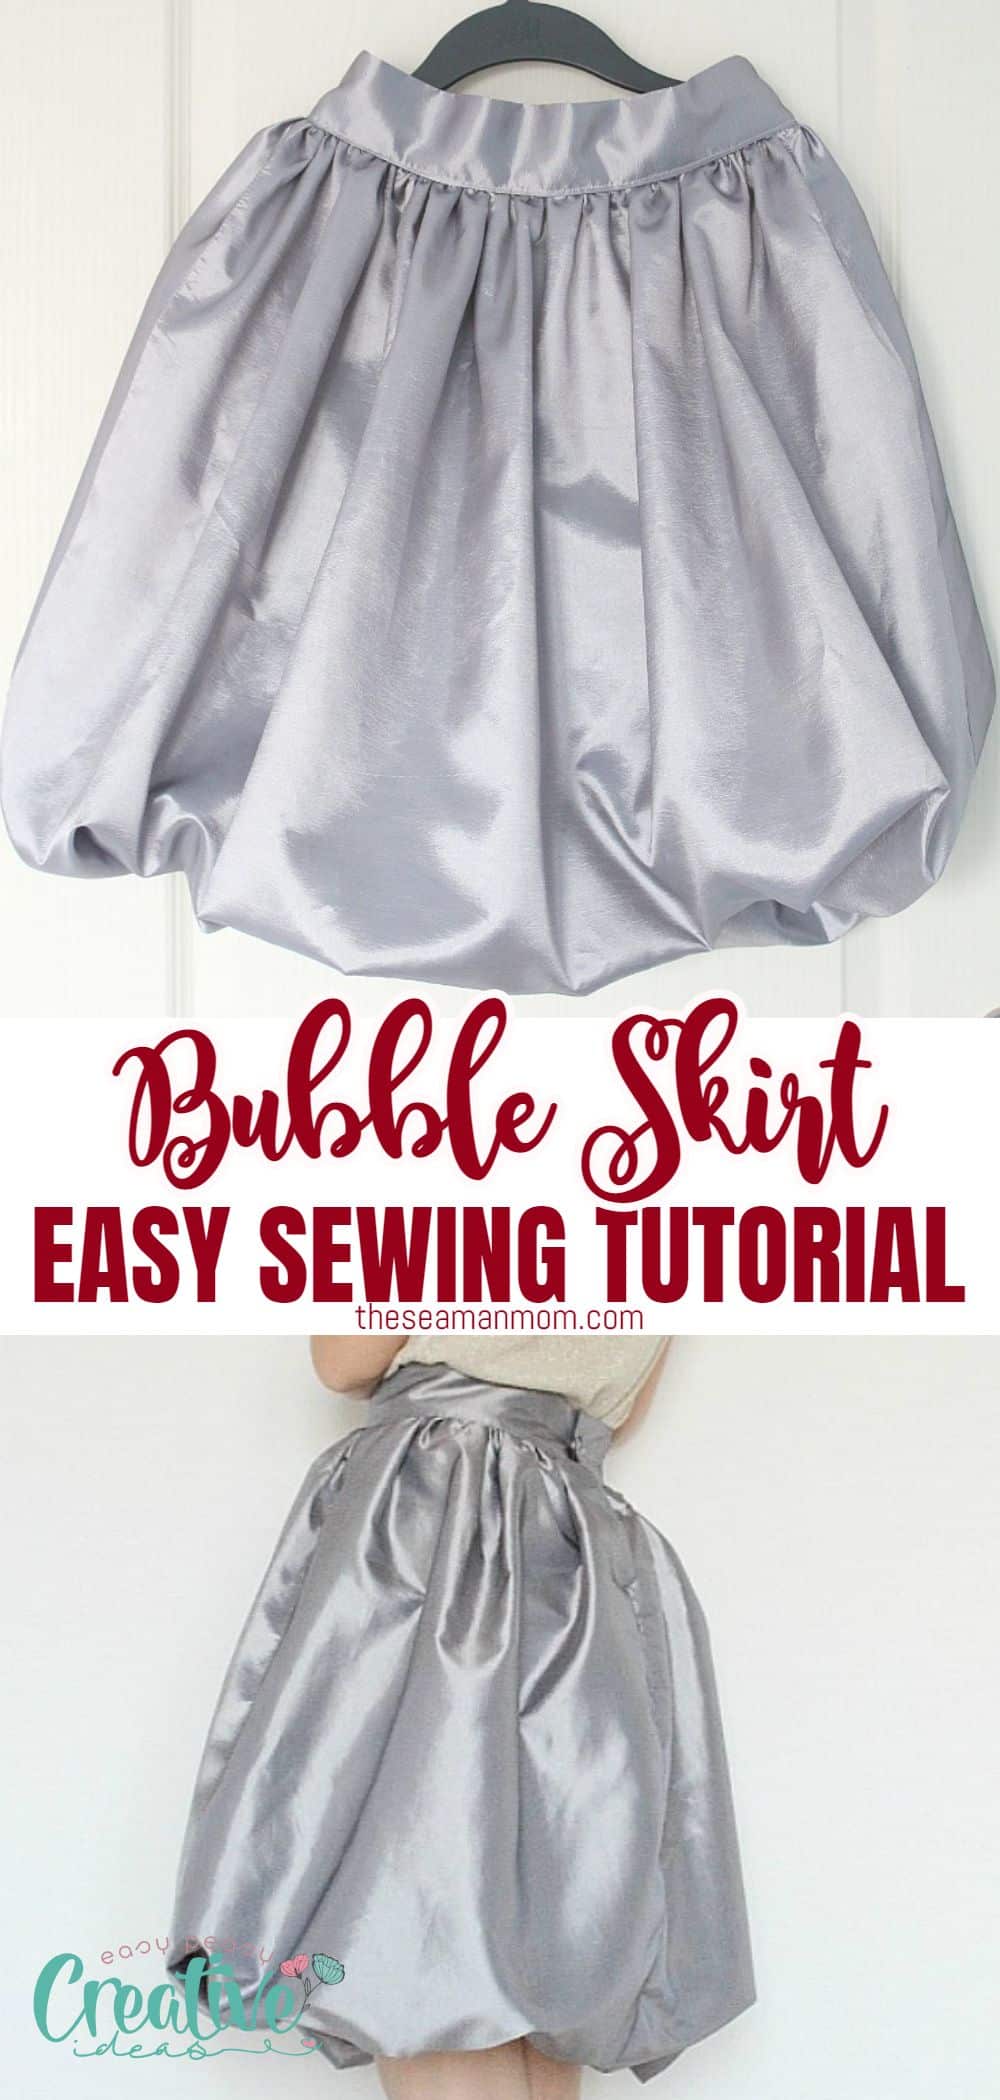 How To Make A Bubble Skirt with Free Printable Pattern